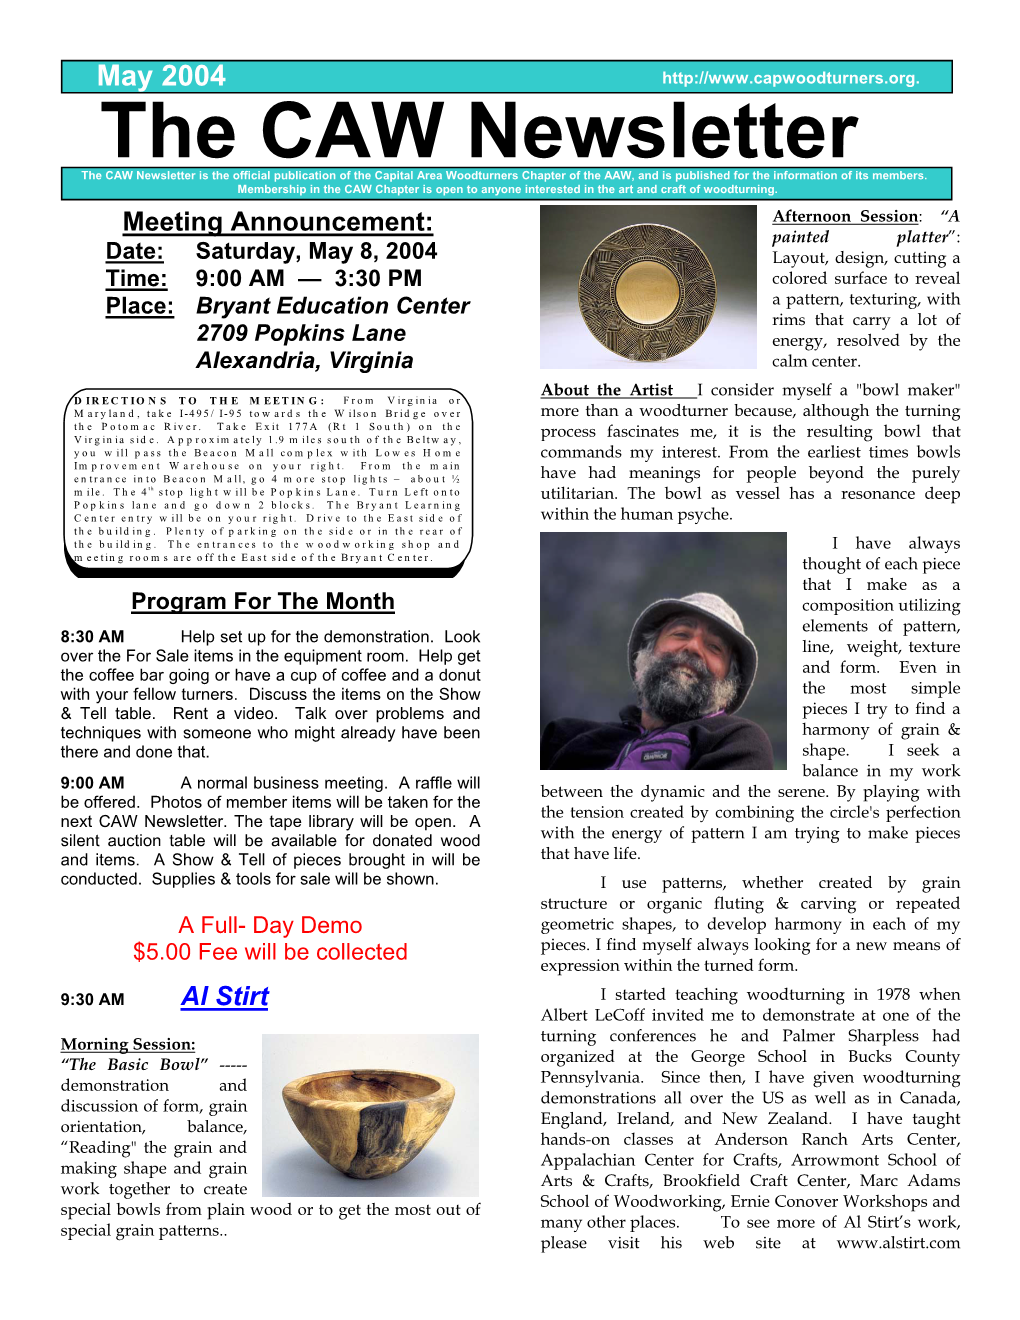 The CAW Newsletter